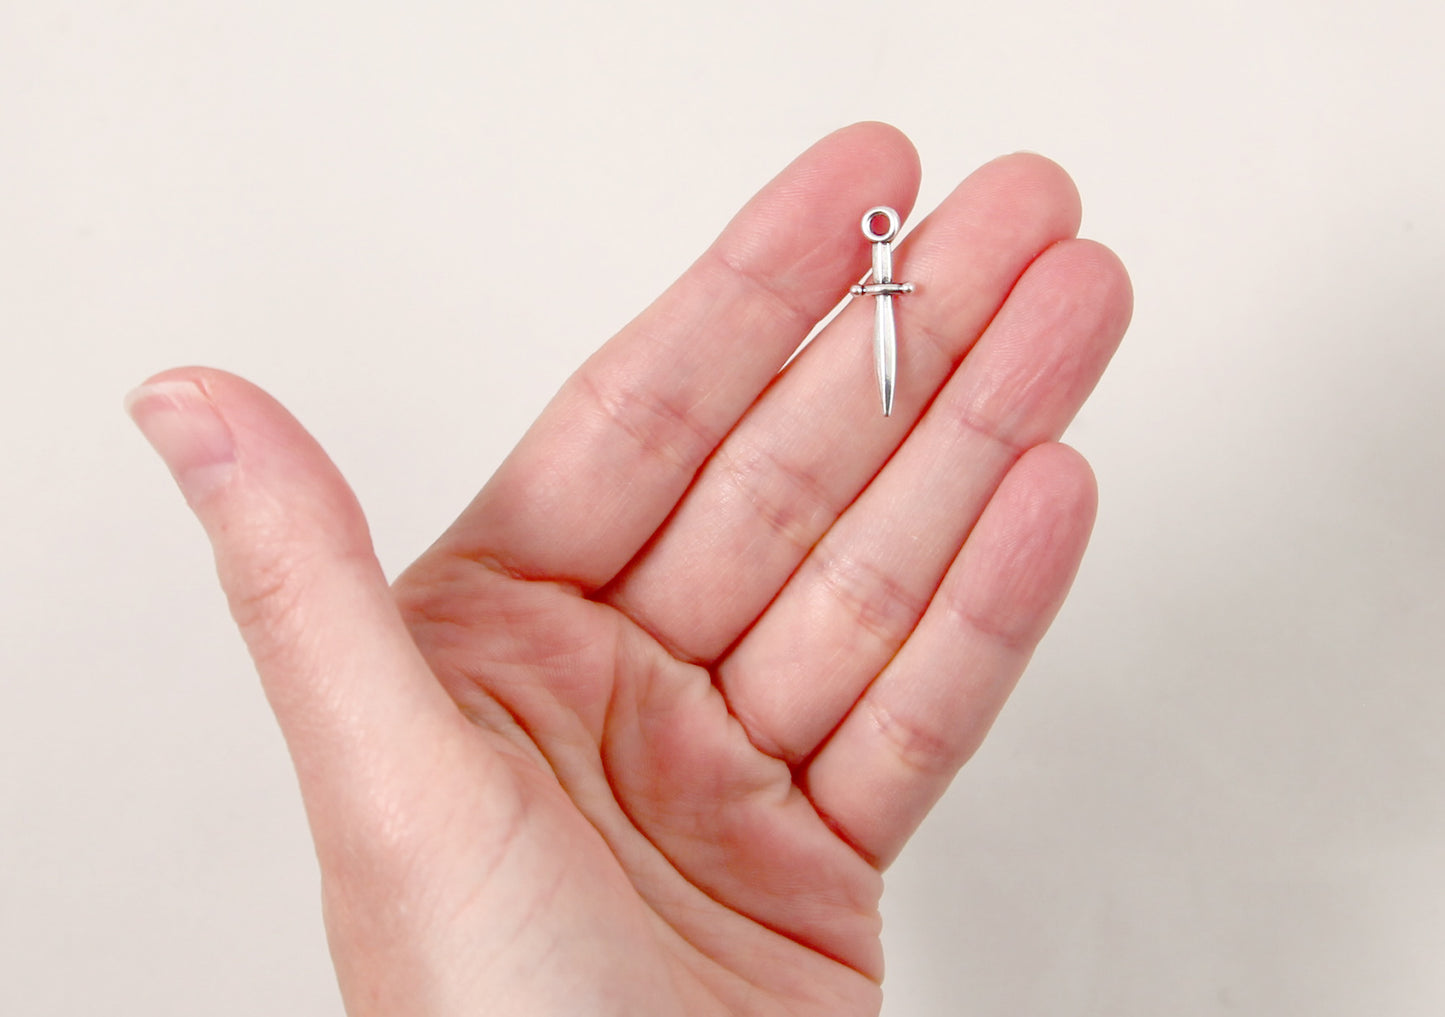 Tiny Sword Charms - 20 pc set - 23mm Metal Sword or Knife Charm - Easy to Make into Earrings